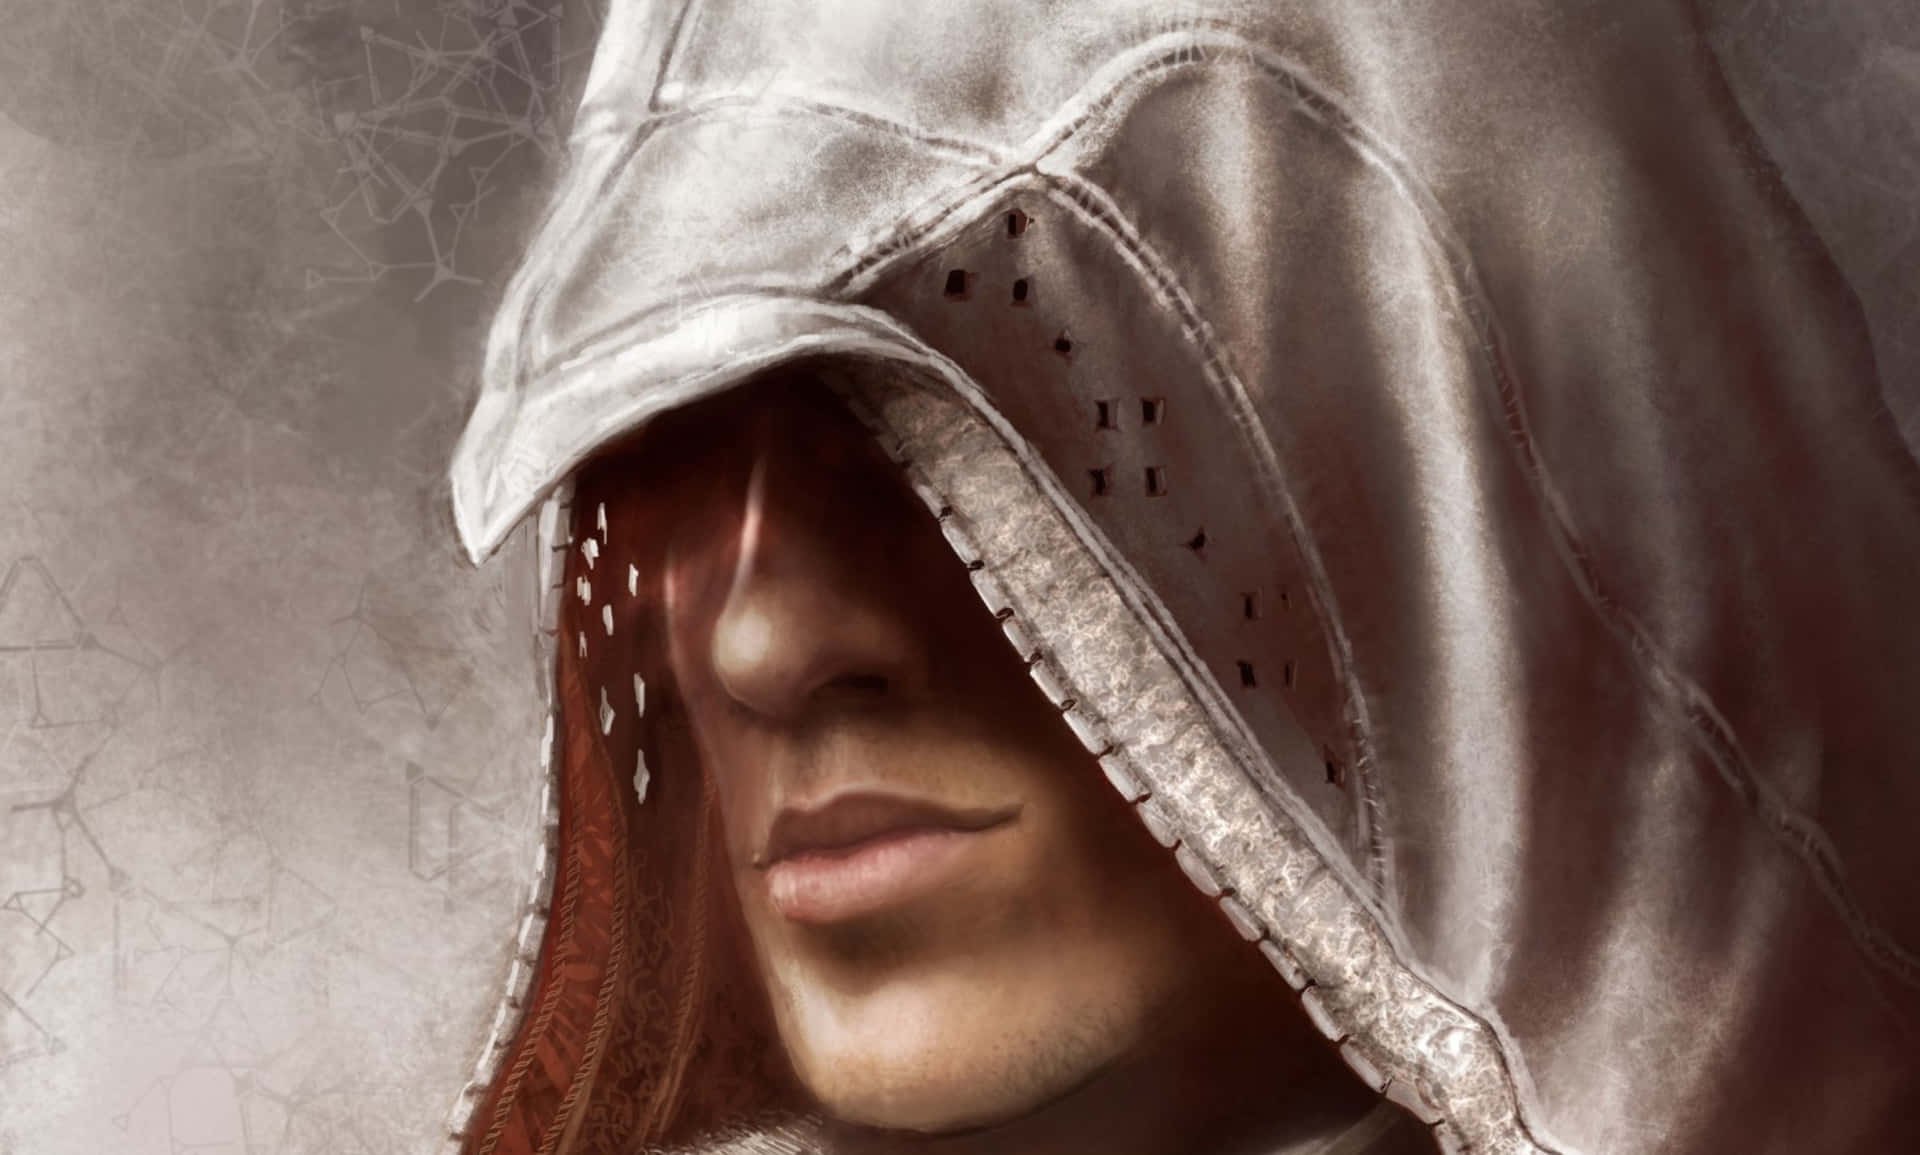 Assassin's Creed Ezio standing on the edge of a rooftop with an intense gaze Wallpaper